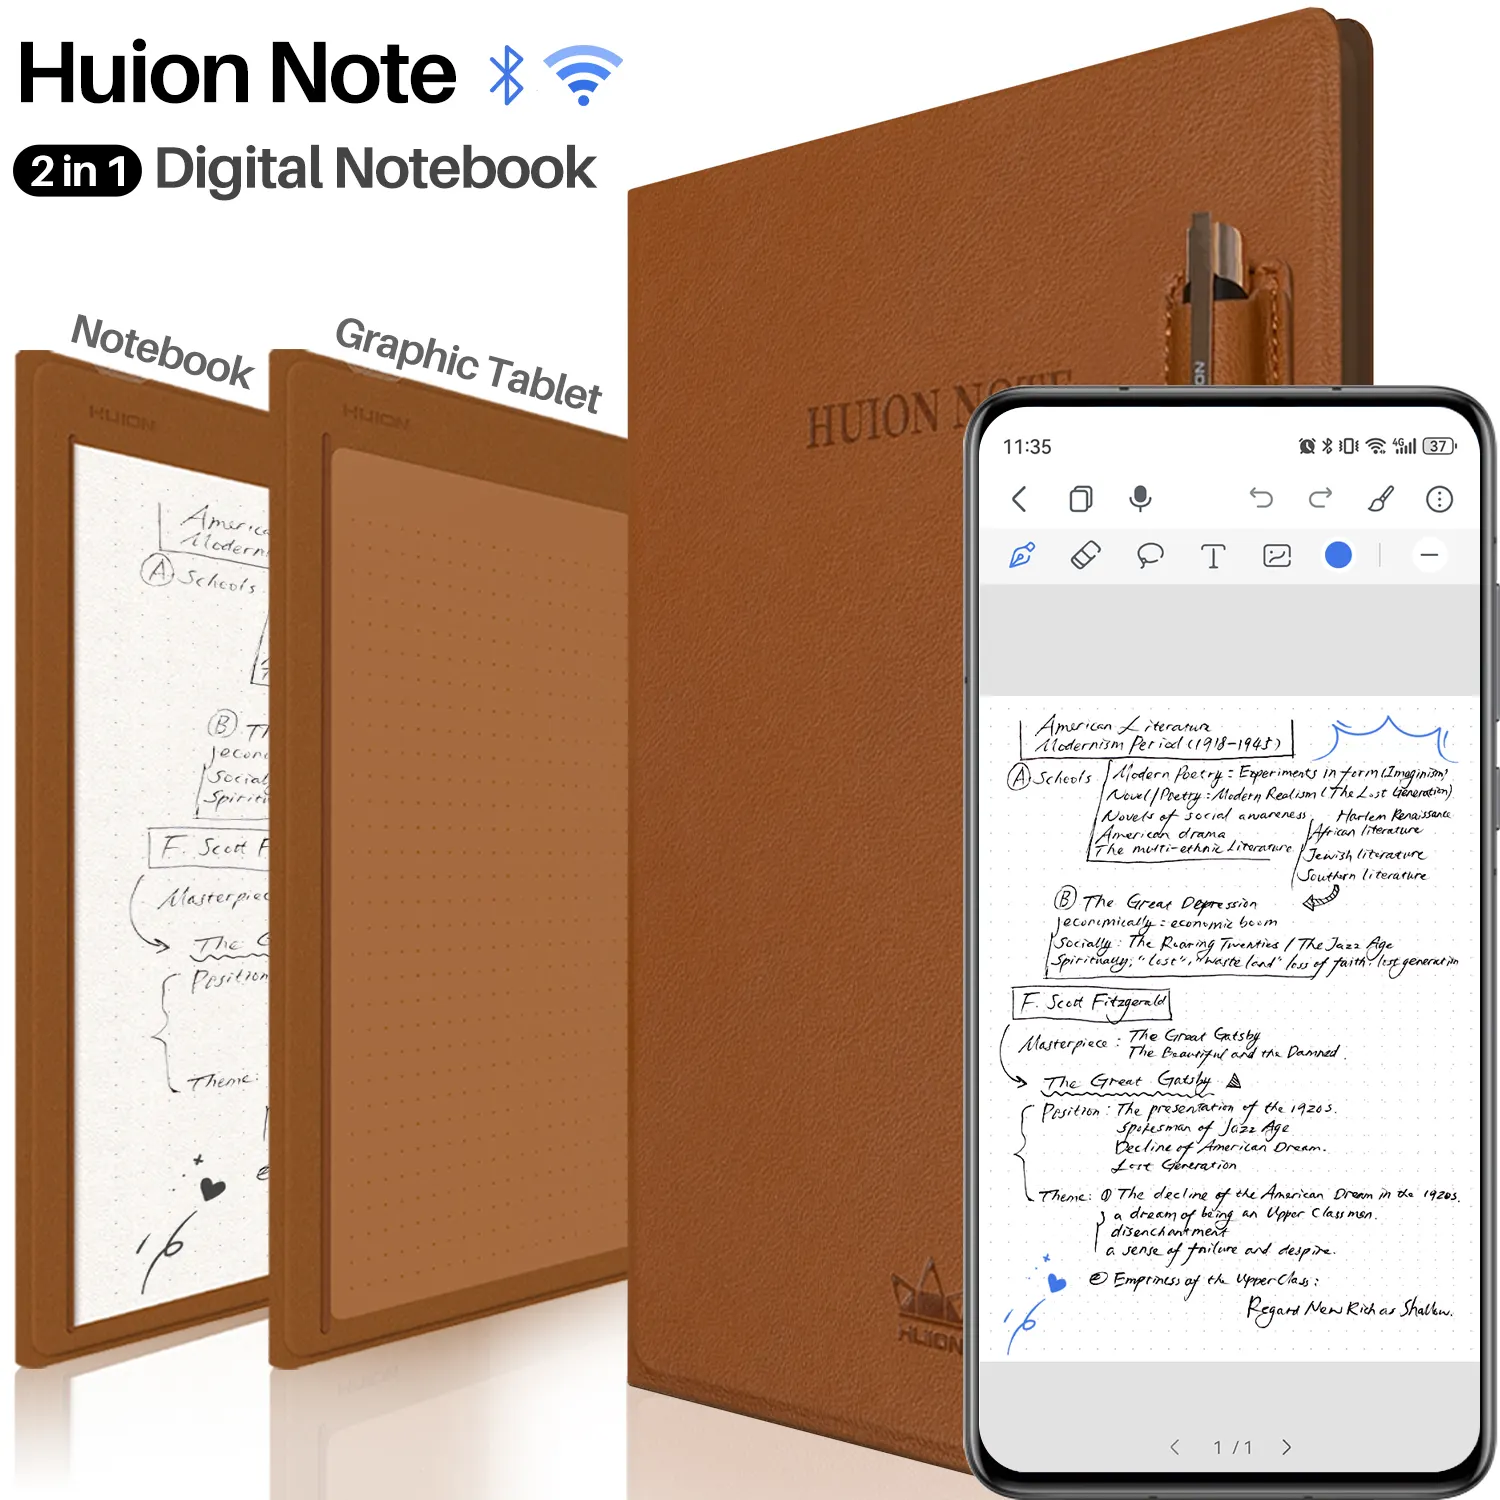 huion note 2 in 1 digital notebook drawing portable electronic wireless a5 size e-writing handwriting smart notebook X10